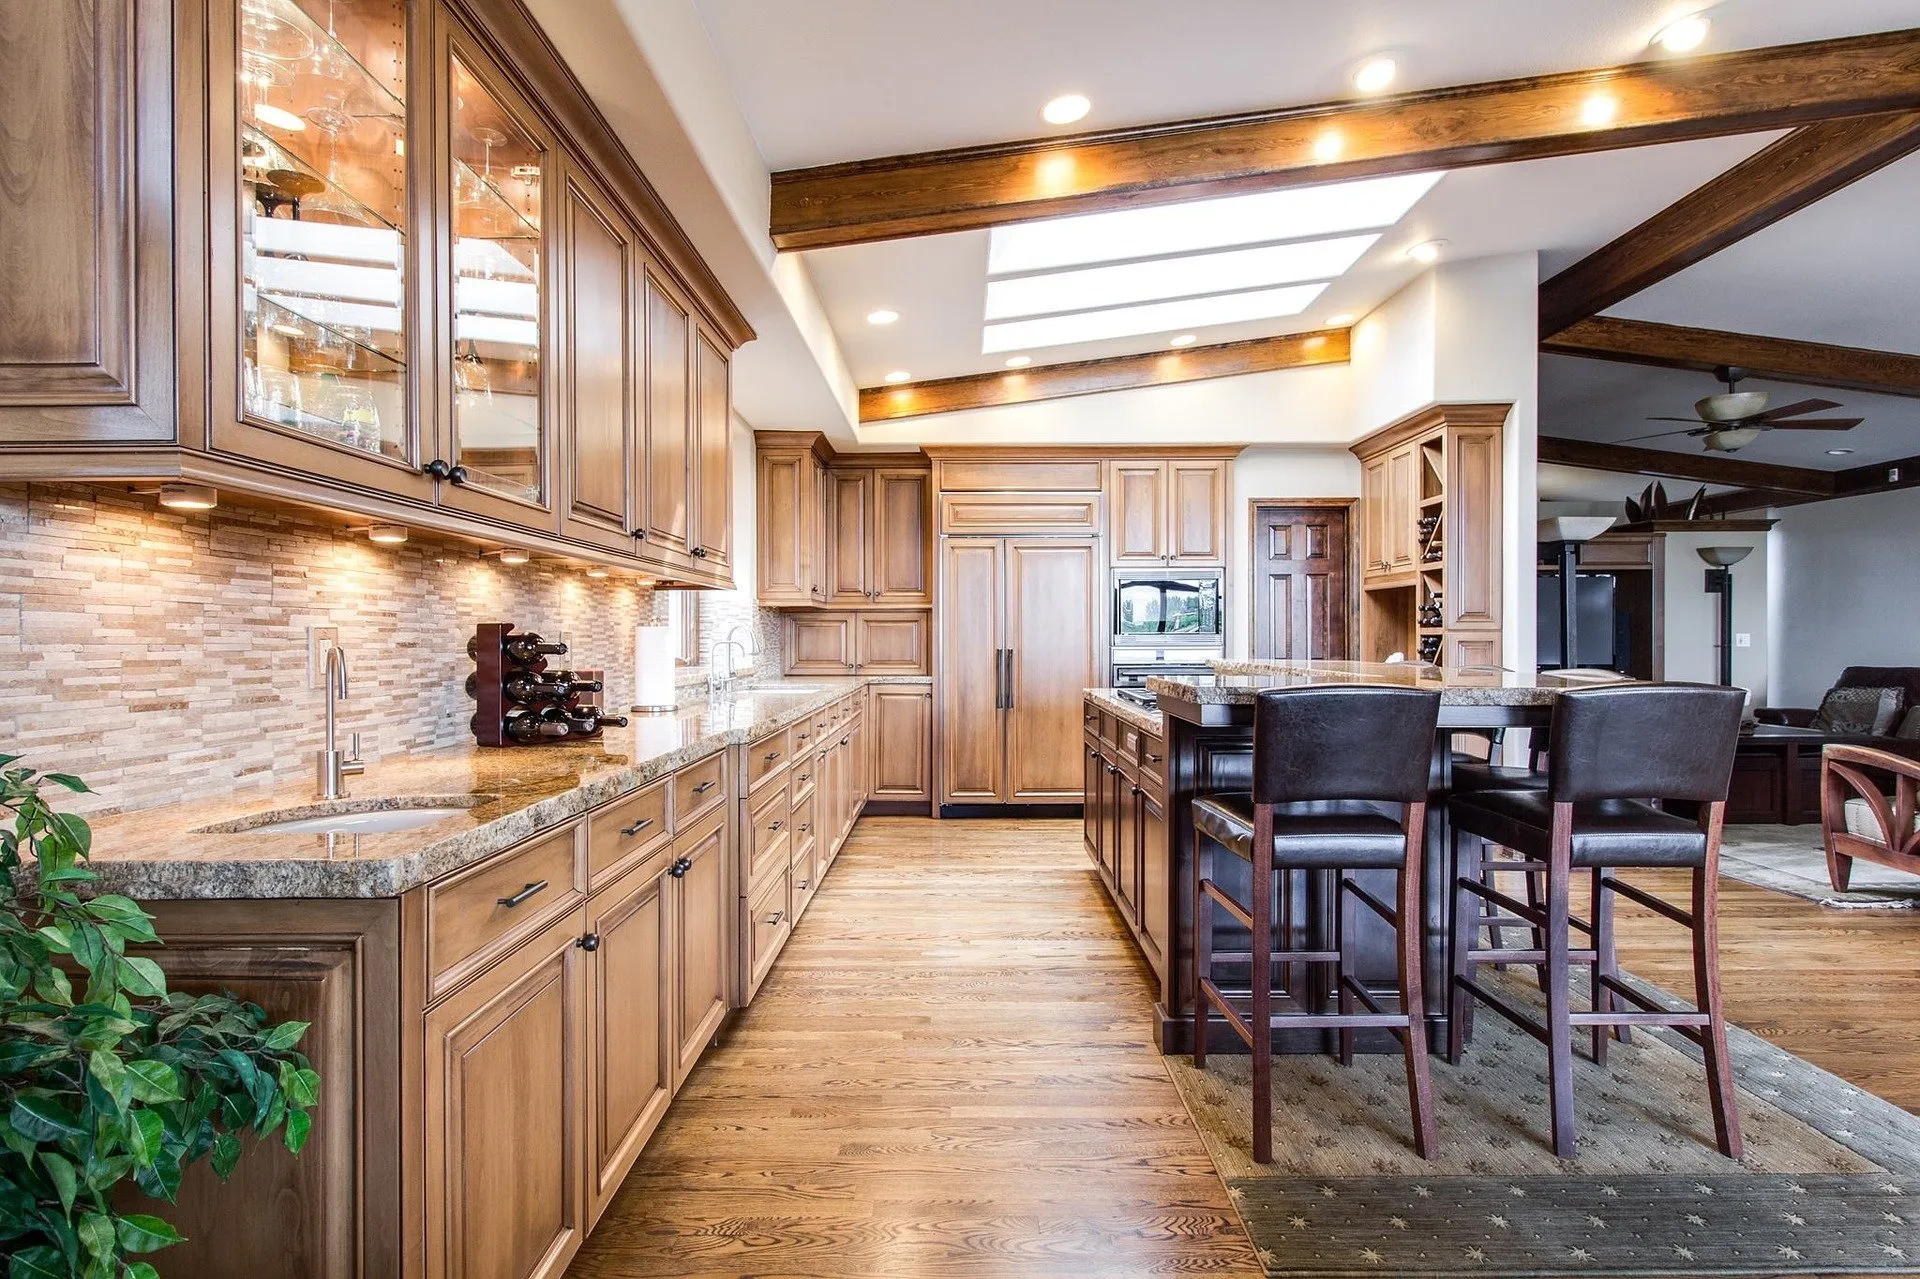 Kitchen with wood cabinetry, including a long counter topped with marble and display hutch with glass windows, kitchen island with breakfast bar chairs and open floor plan leading into living room space